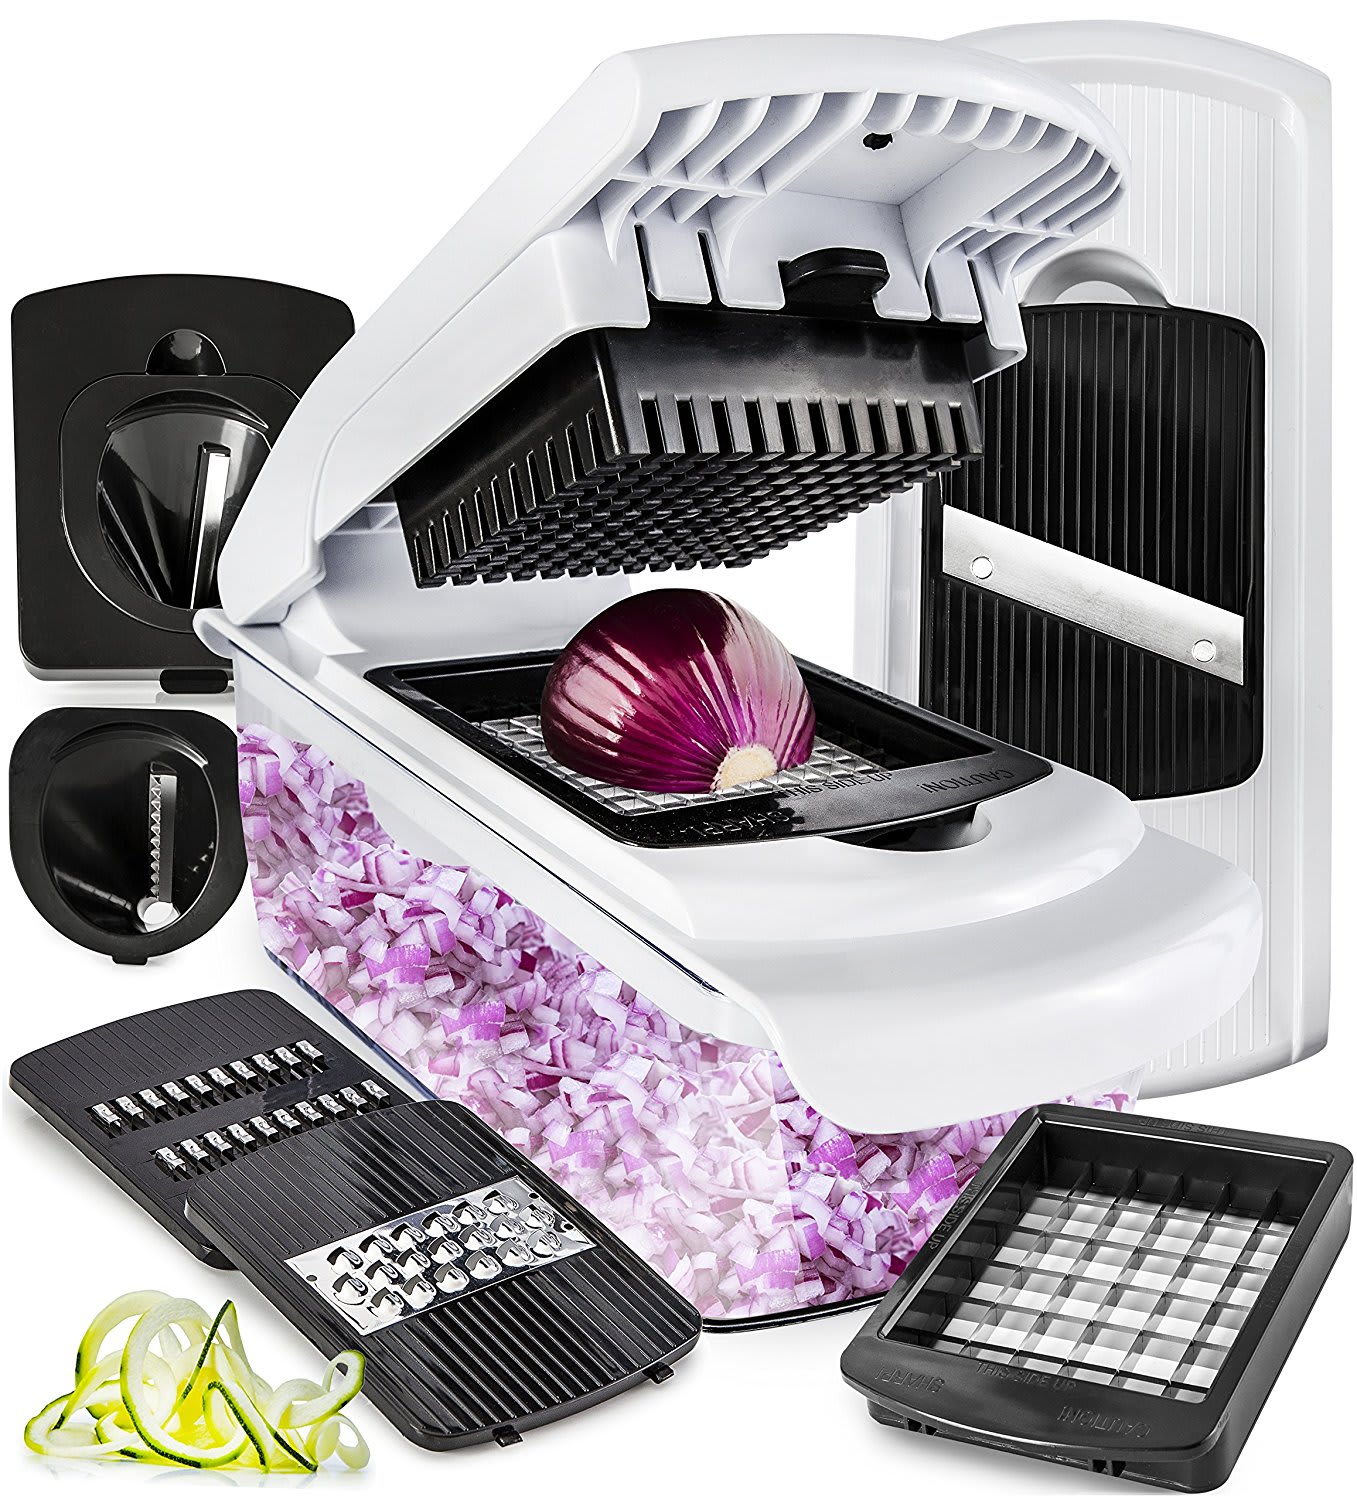 My Favorite Onion Chopper (for veggies and more) - Spend With Pennies